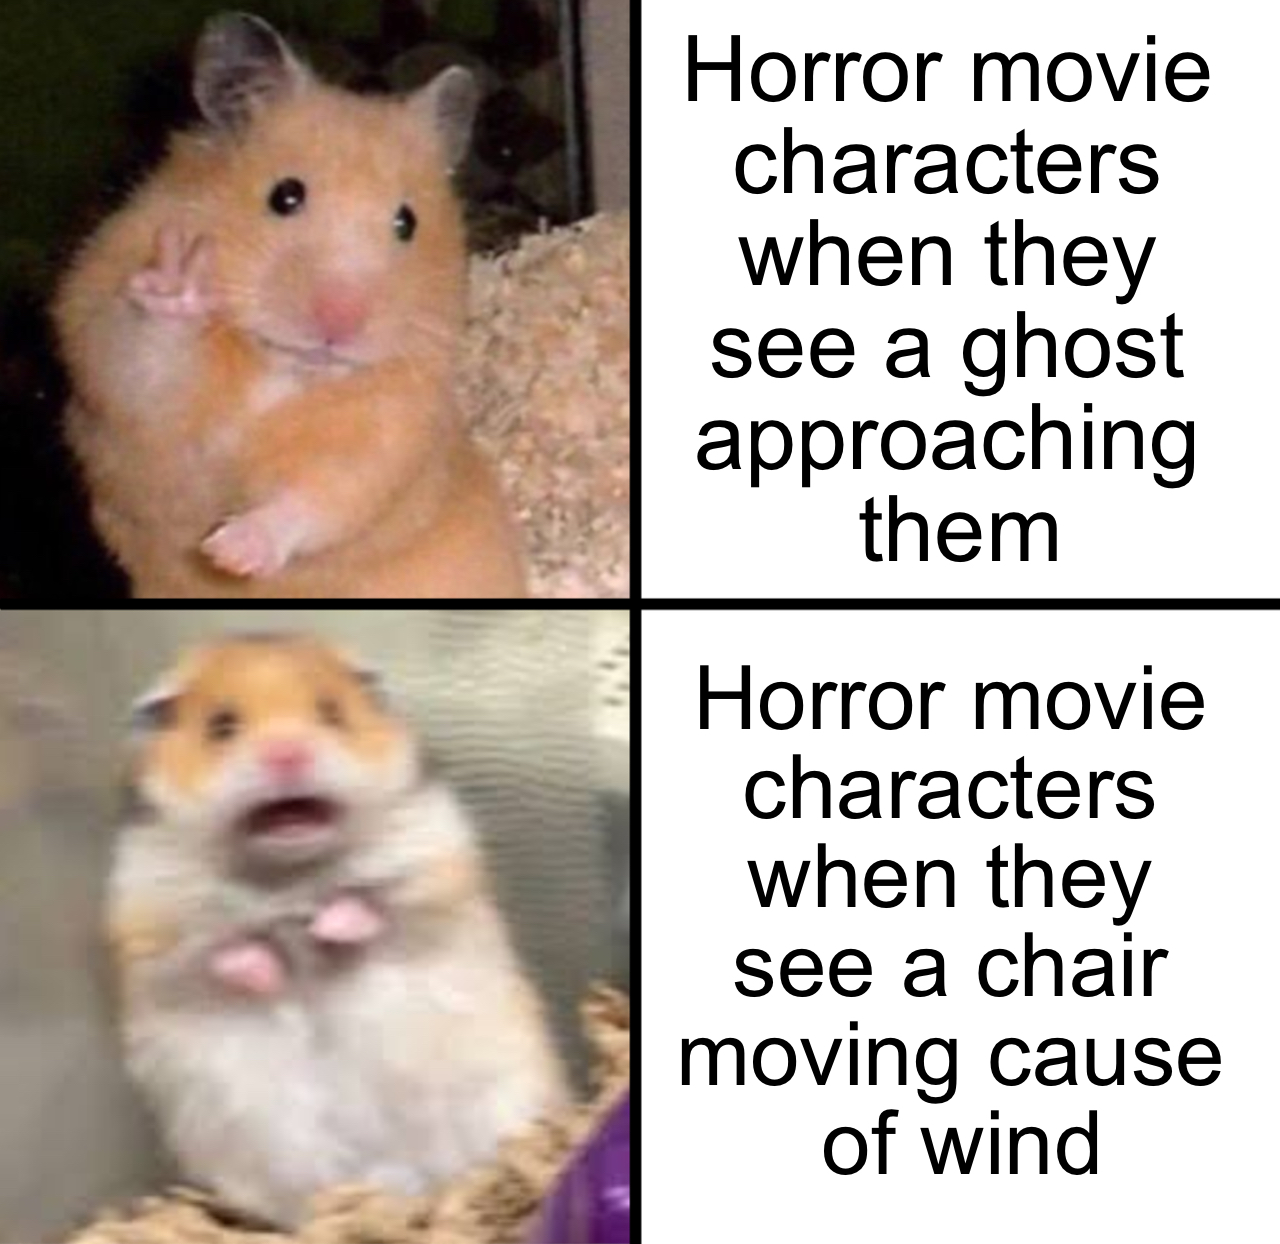 meme template scared - Horror movie characters when they see a ghost approaching them Horror movie characters when they see a chair moving cause of wind